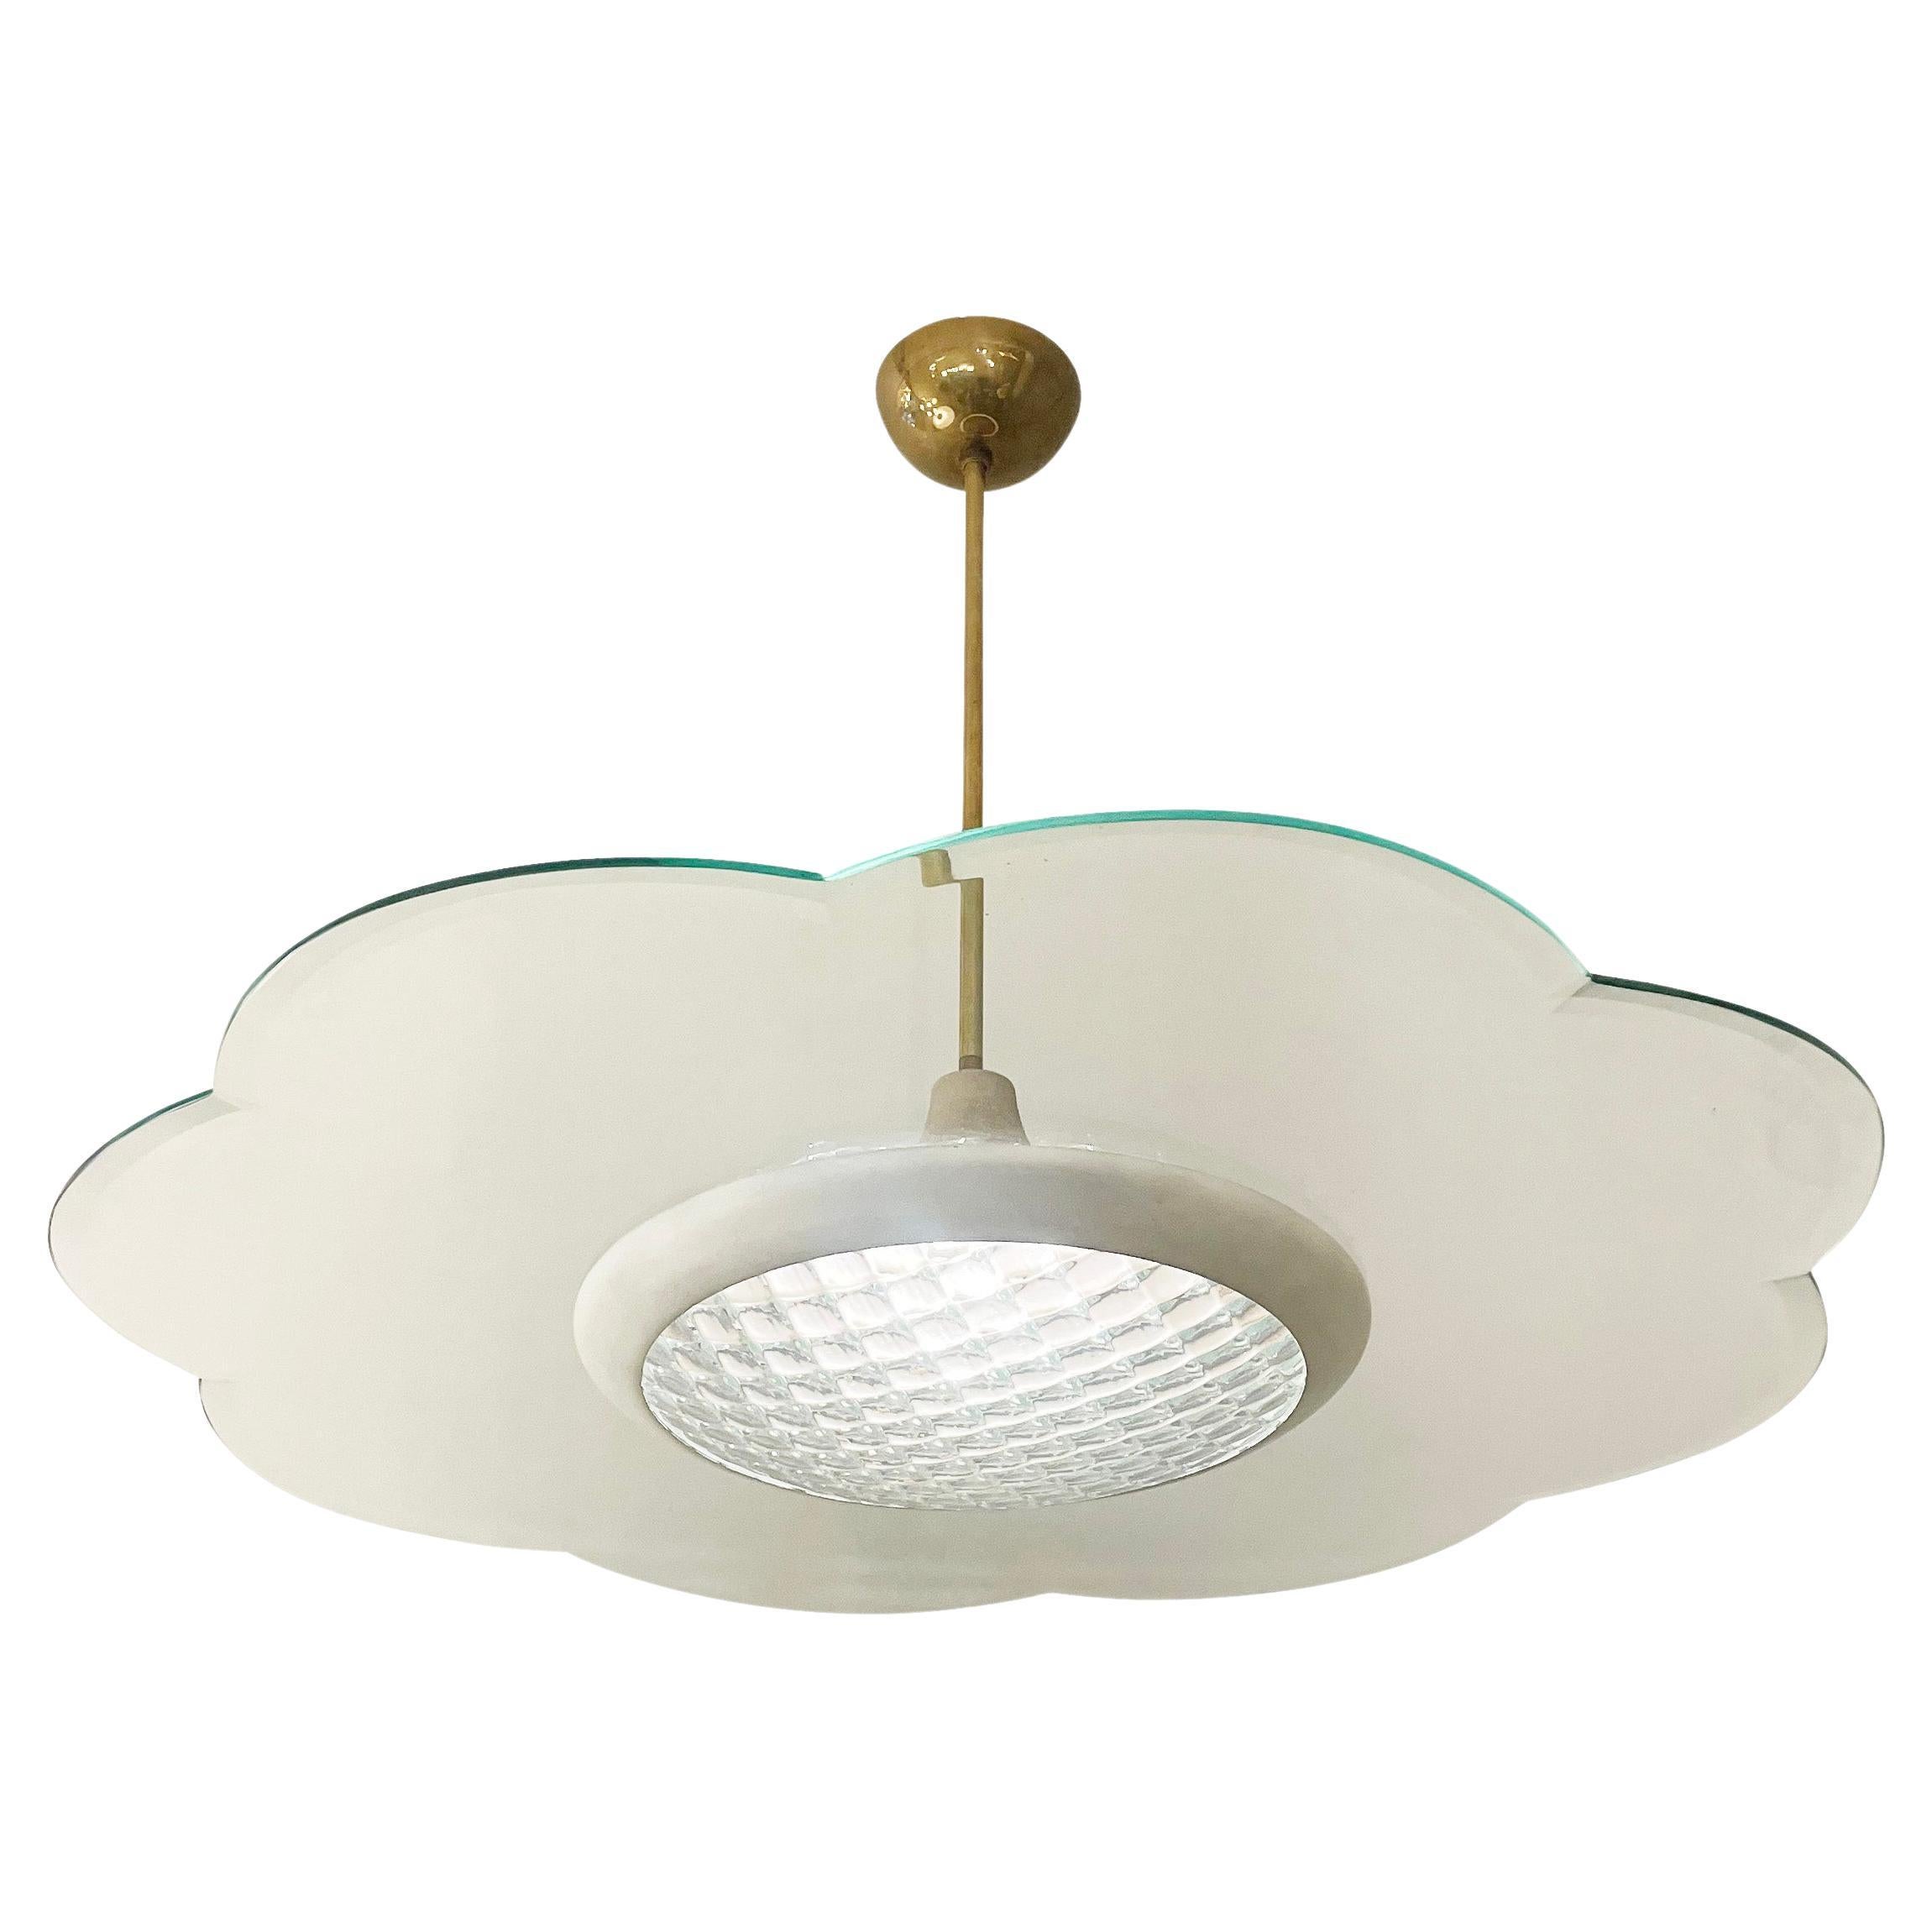 Italian Midcentury Chandelier with Scalloped Glass